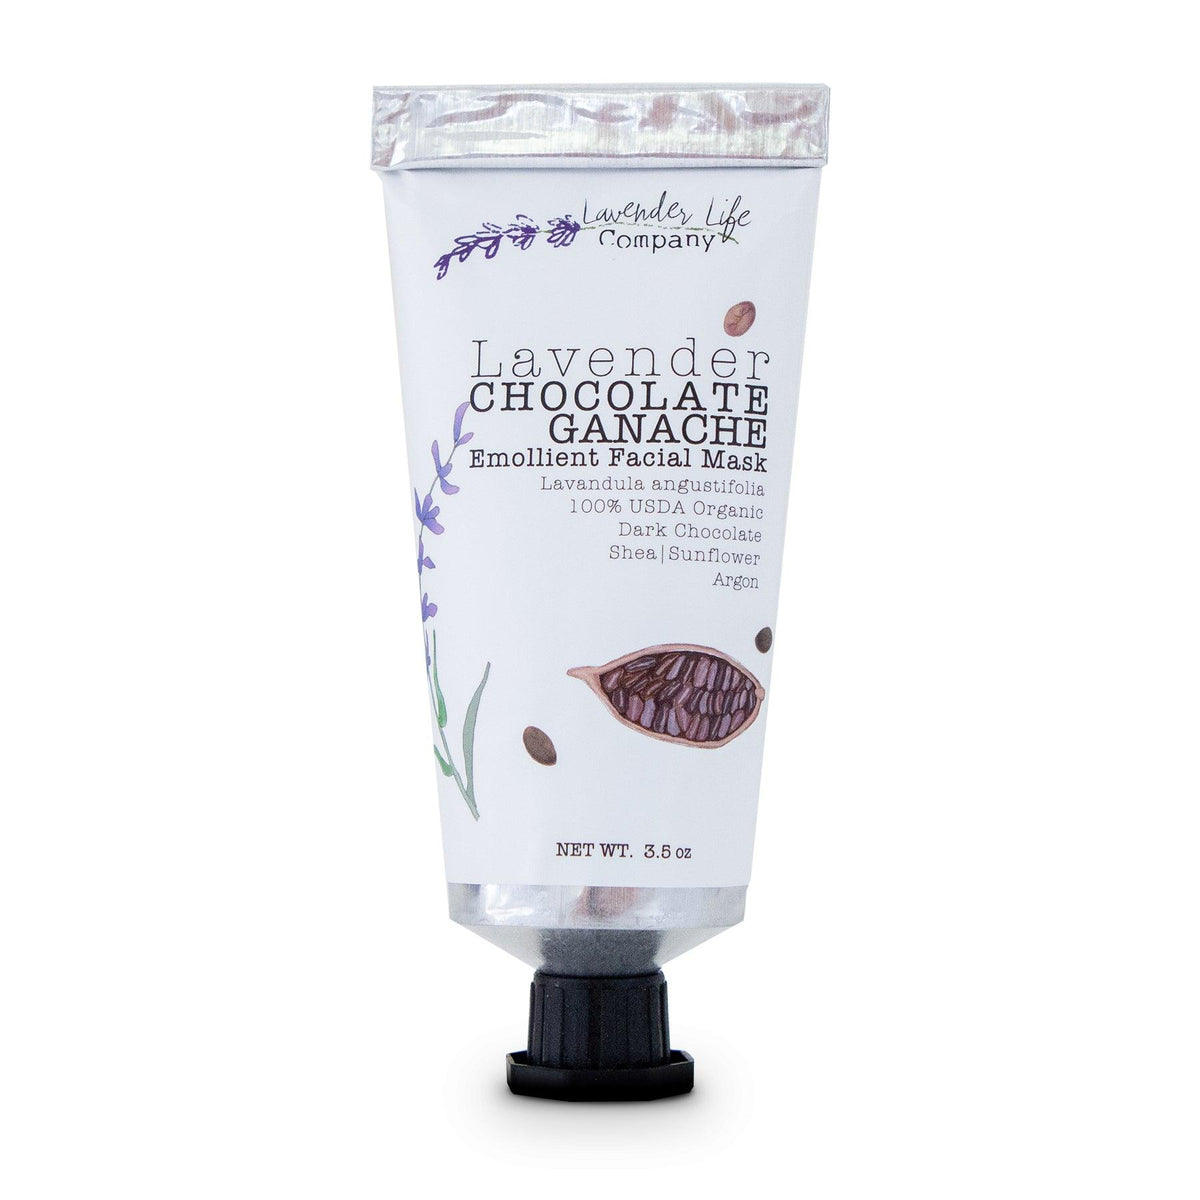 Nourishing Facial Mask with Lavender & Chocolate Ganache - Lavender Life Company